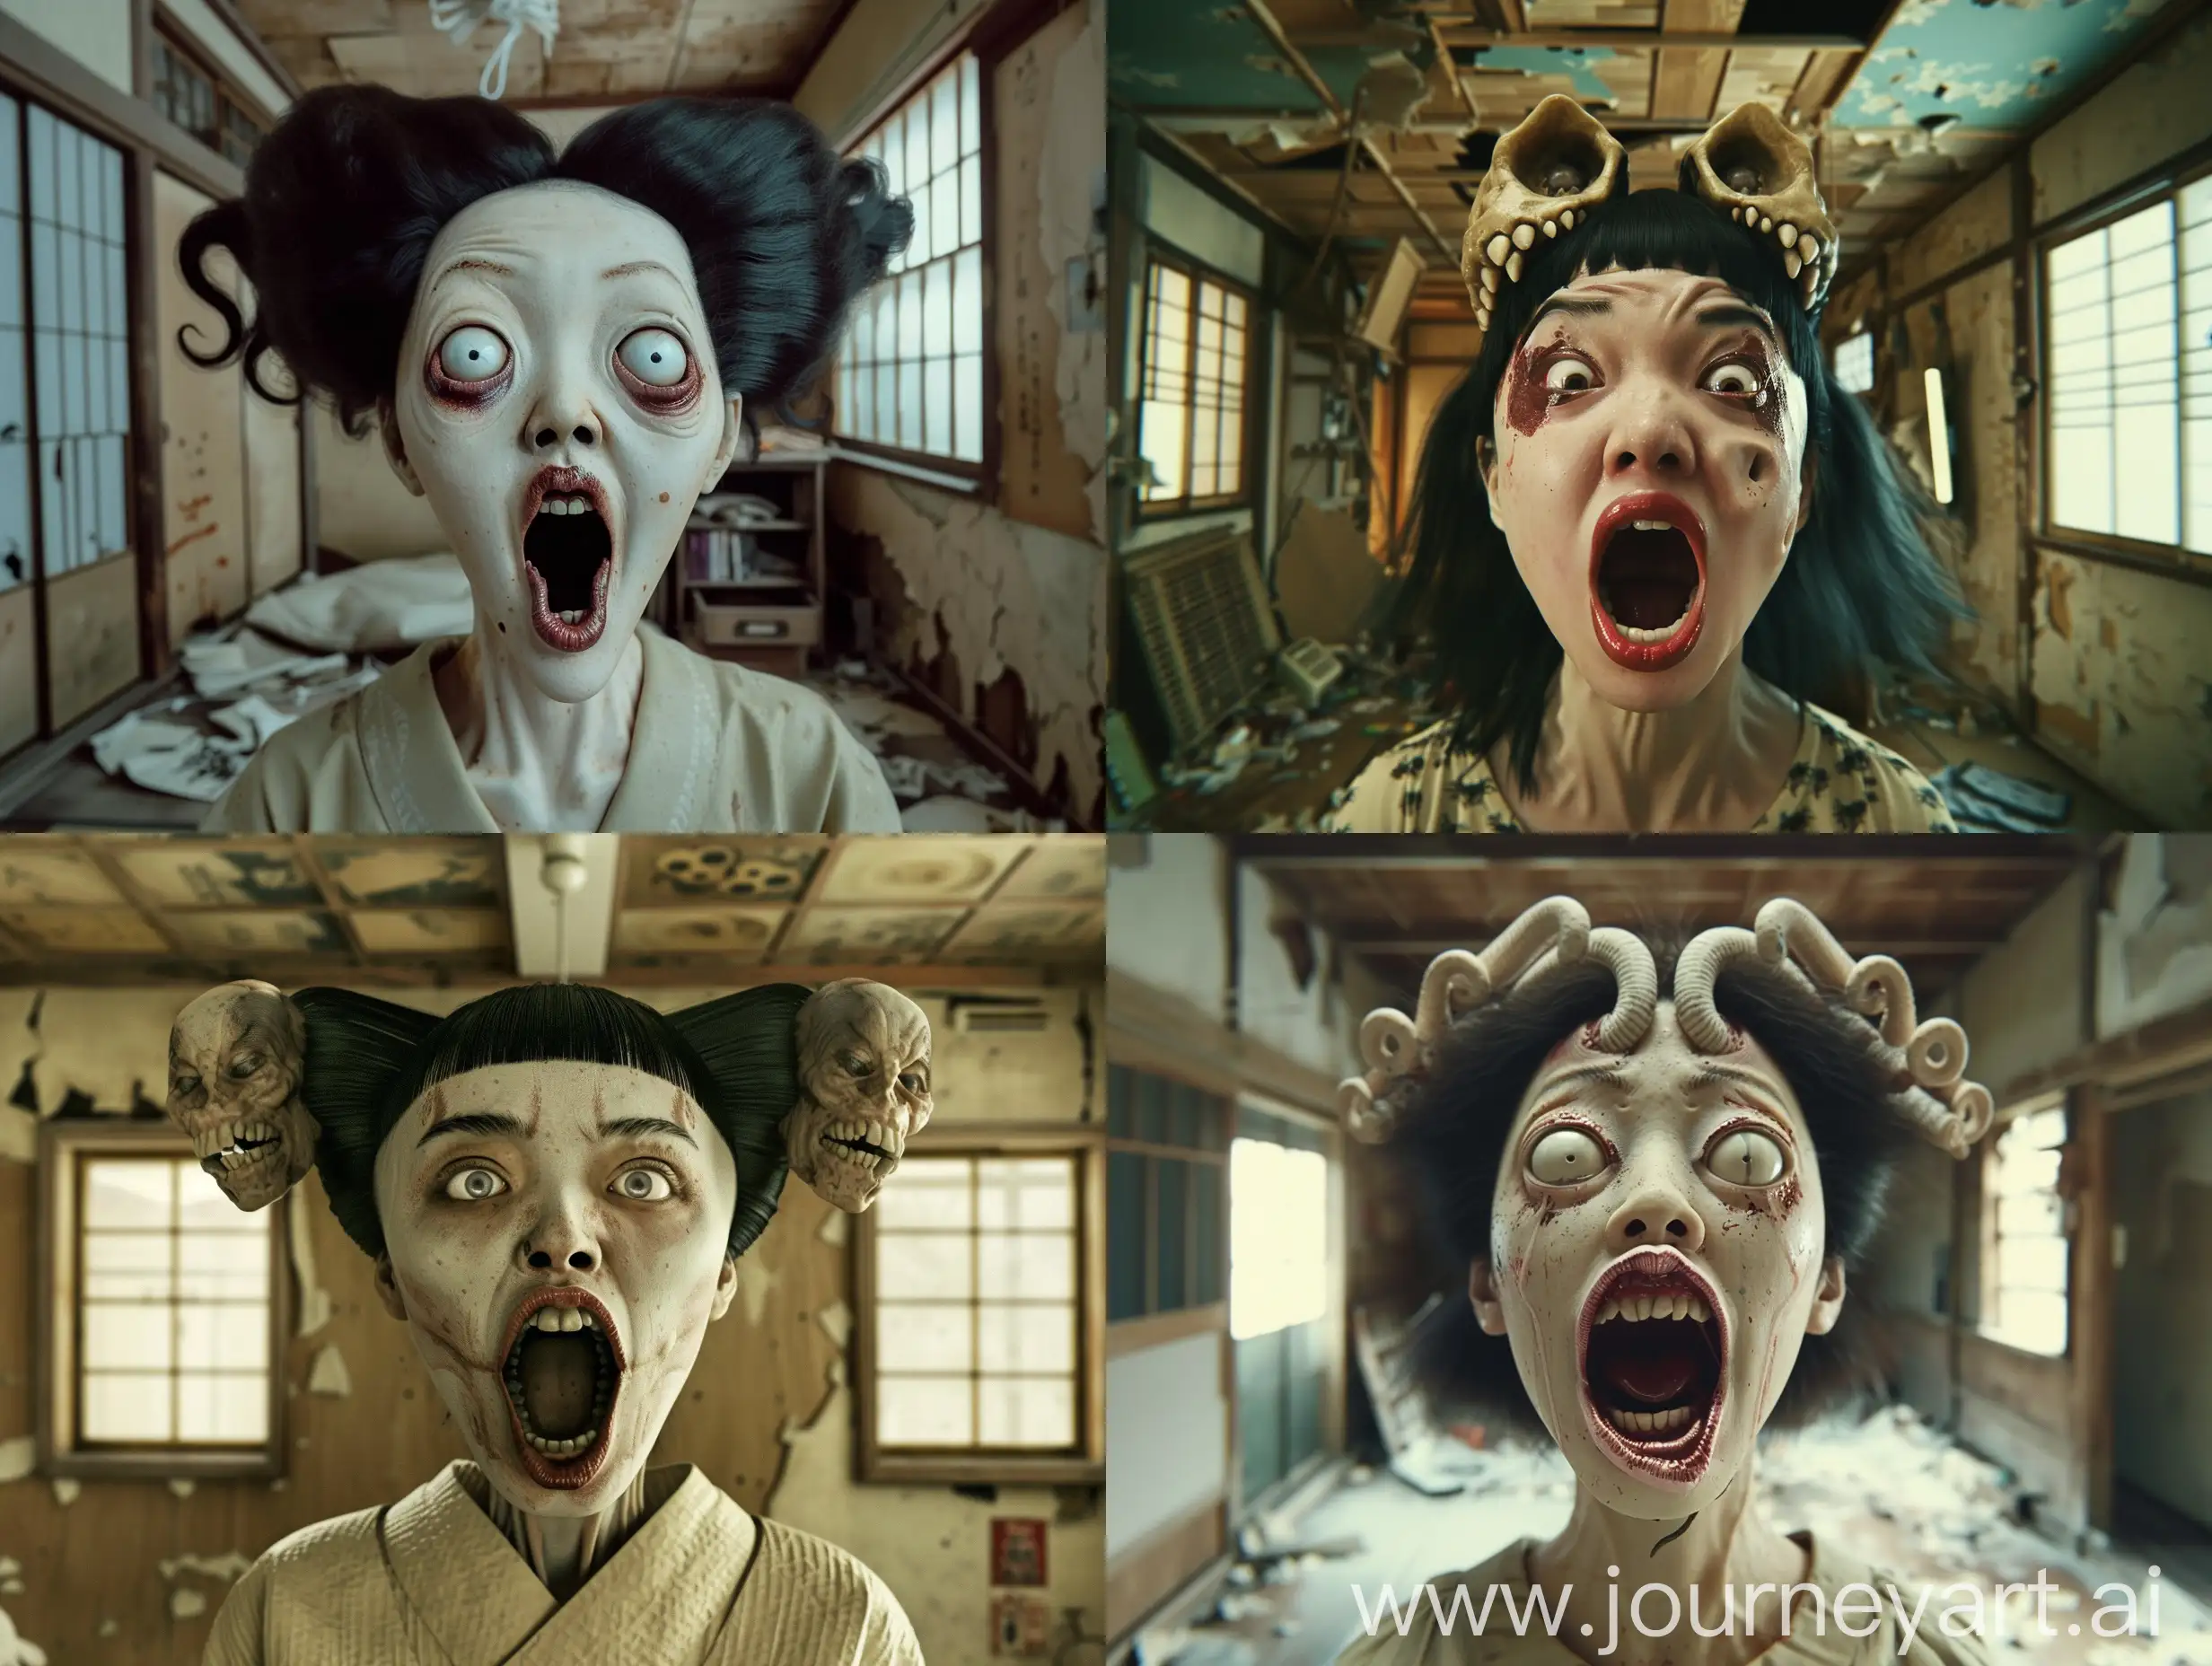 cinematic, realism, Using (((imagination))) to craft a photorealistic representation of an unusual fantasy dream, Cinematic shooting techniques and shooting angles, use wide-angle lens, long-shot, top-shot. Describing yokai ((( Futakuchi-onna, She is characterized by her two mouths, a normal one located on her face and a second one on the back of the head beneath the hair. There, the woman's skull splits apart, forming lips, teeth and a tongue, creating an entirely functional second mouth))) Japan in the 1970s, dim Japanese independent homes, chaos, dilapidation, filth, Amazing, shocking, Mysterious, Contrasty, ivory colors, Memphis, The image should capture every detail of the yokai with UHD 8K clarity, reminiscent of a cinematic scene, vivid and lifelike.